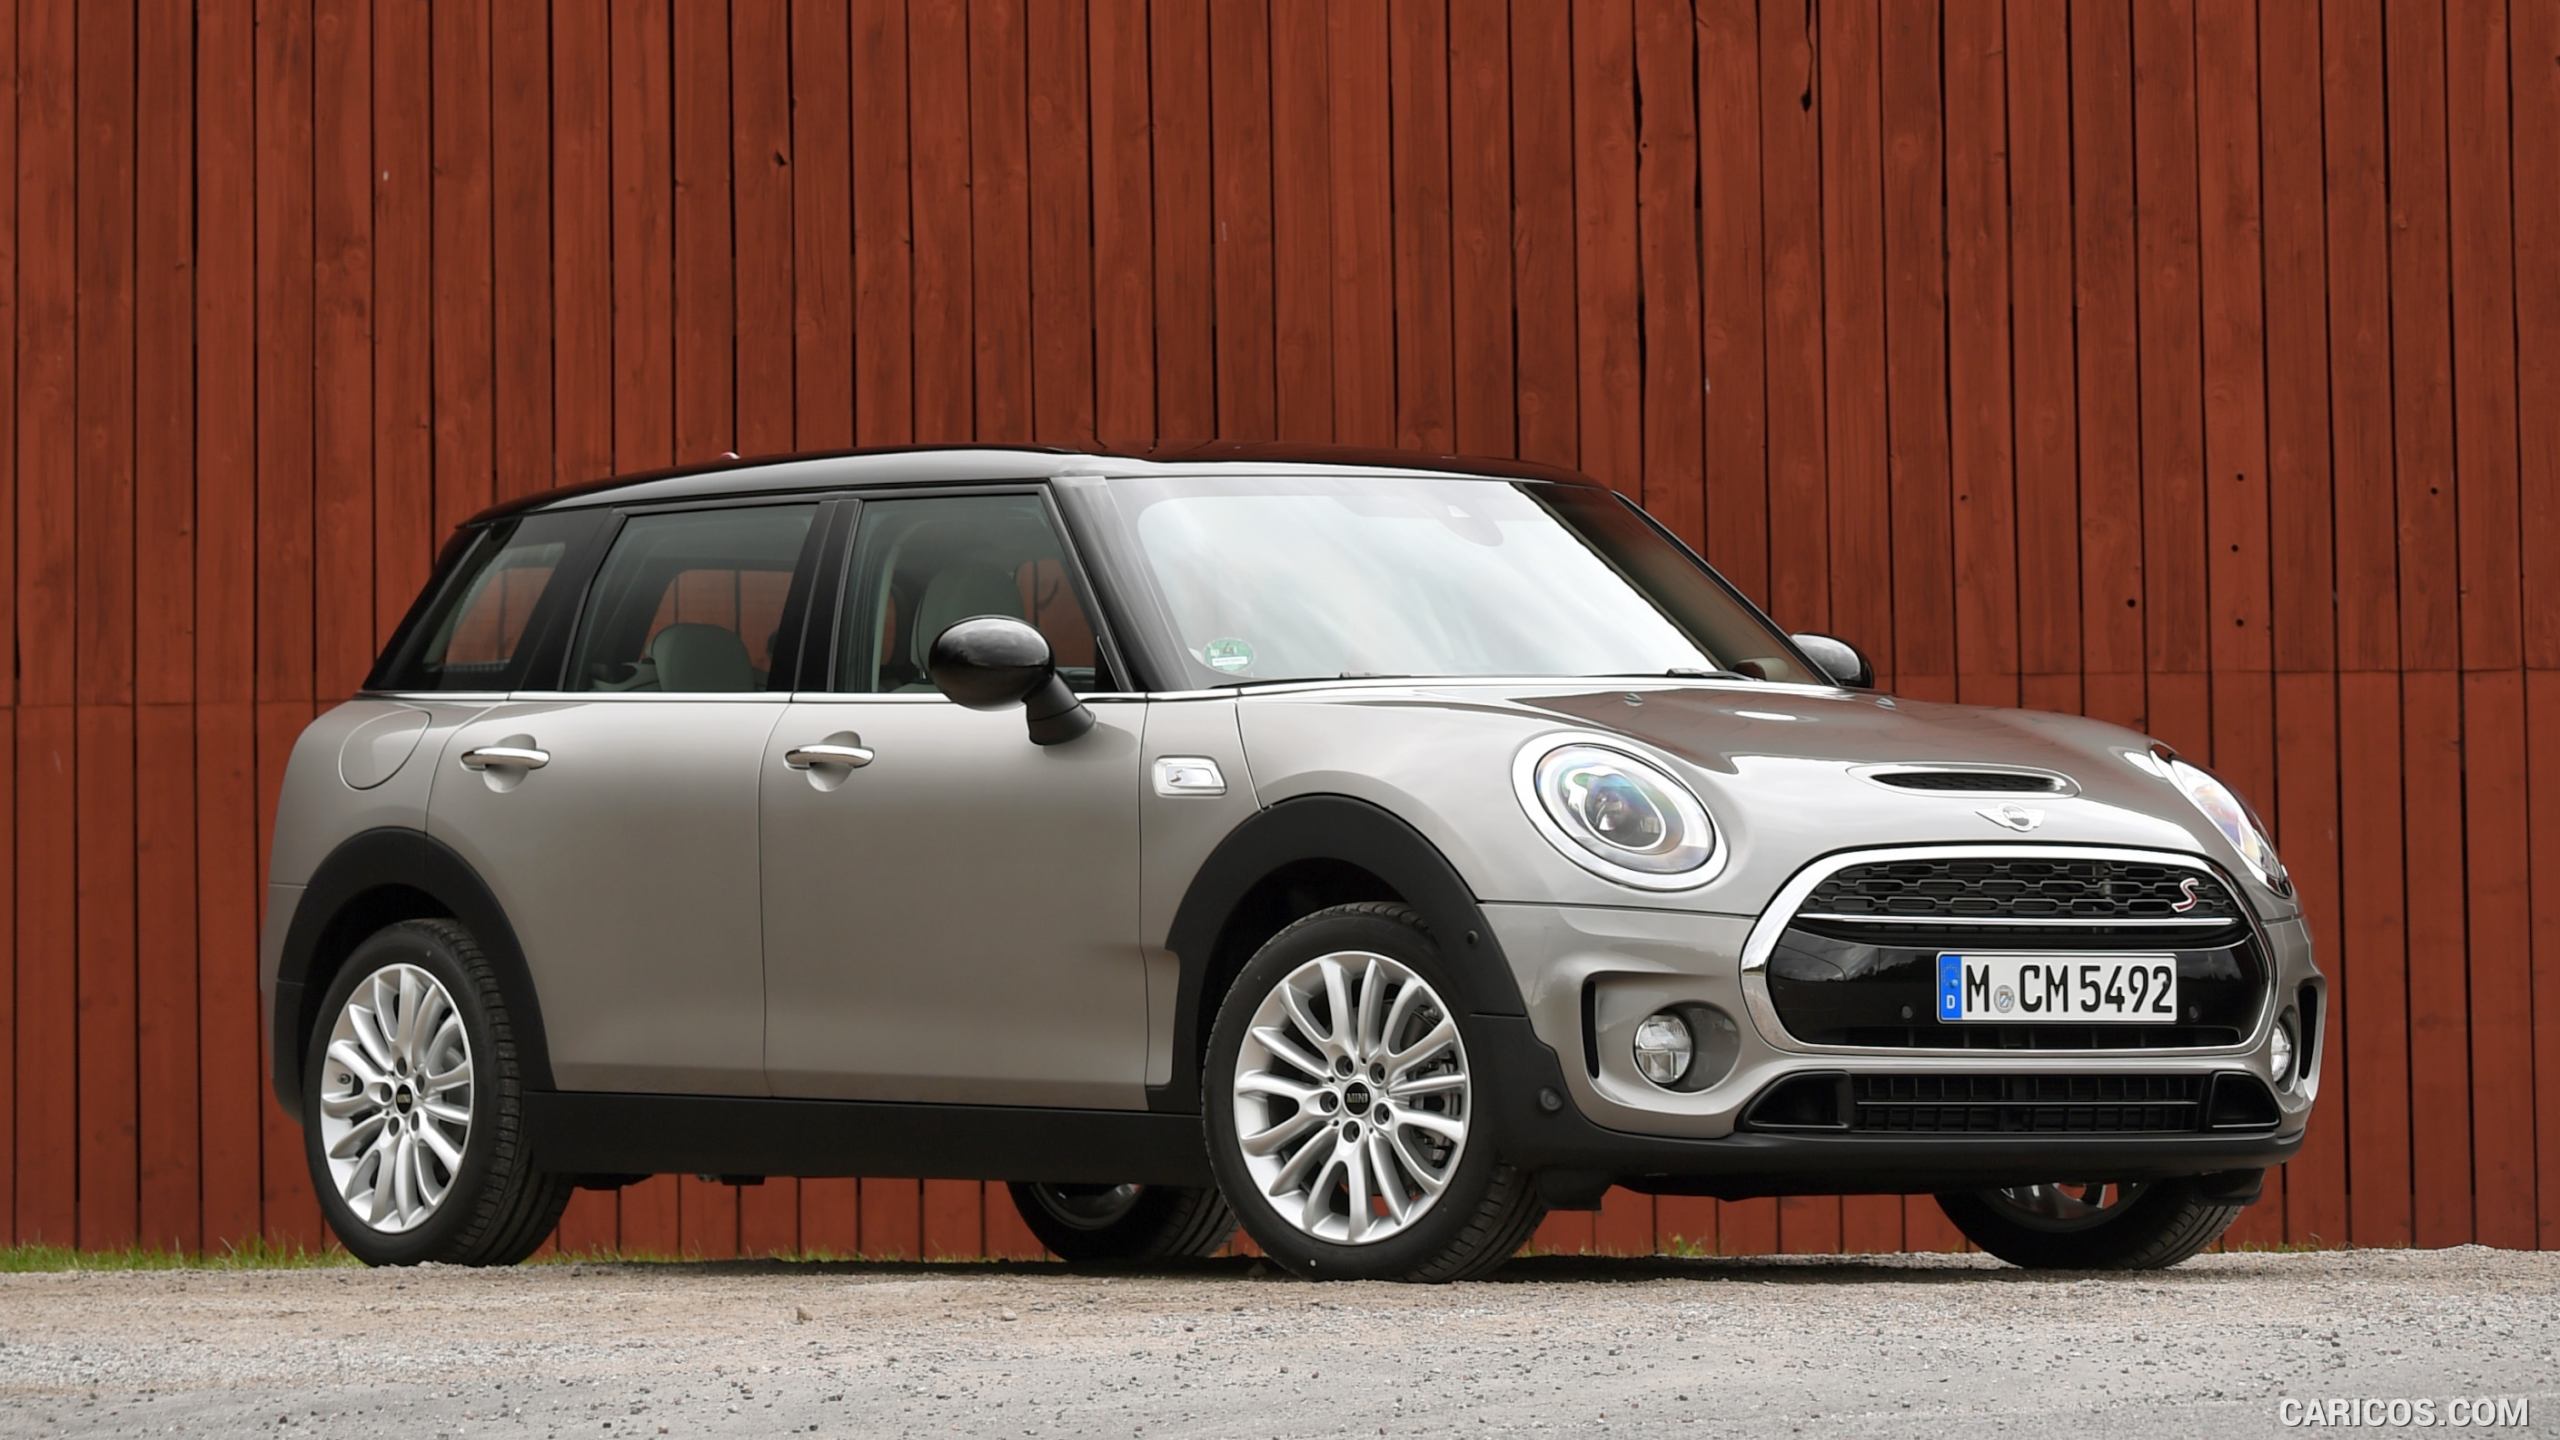 2016 MINI Cooper S Clubman in Metallic Melting Silver - Front, #204 of 380